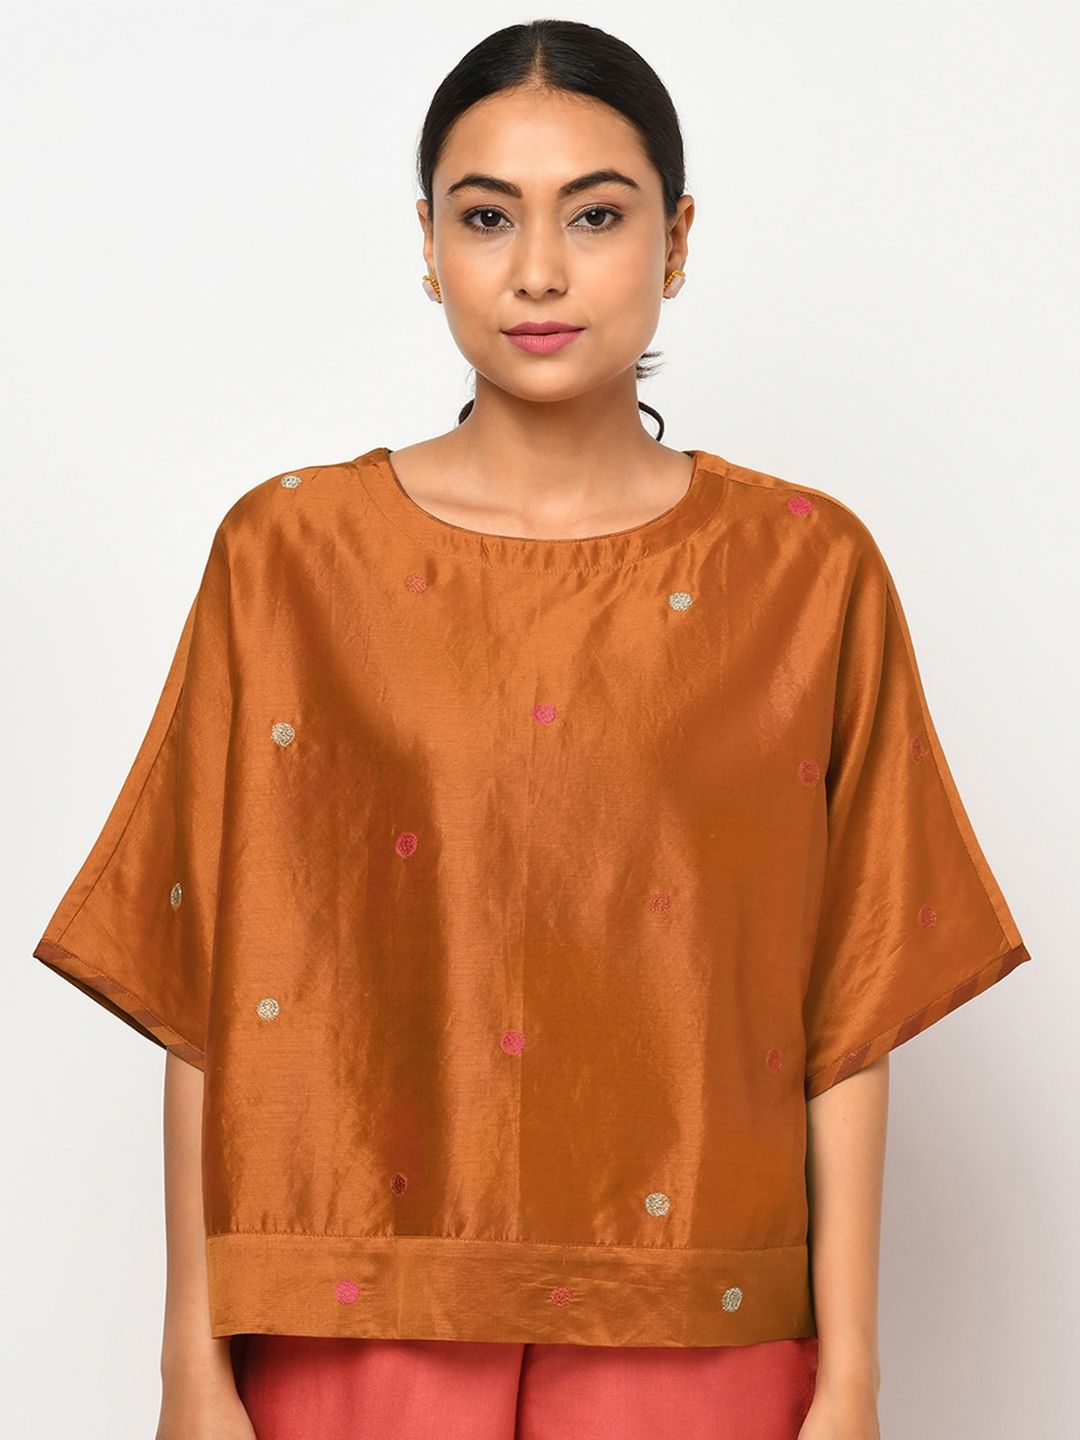 Fabindia Rust Geometric Embroidered Extended Sleeves Boxy Top Price in India